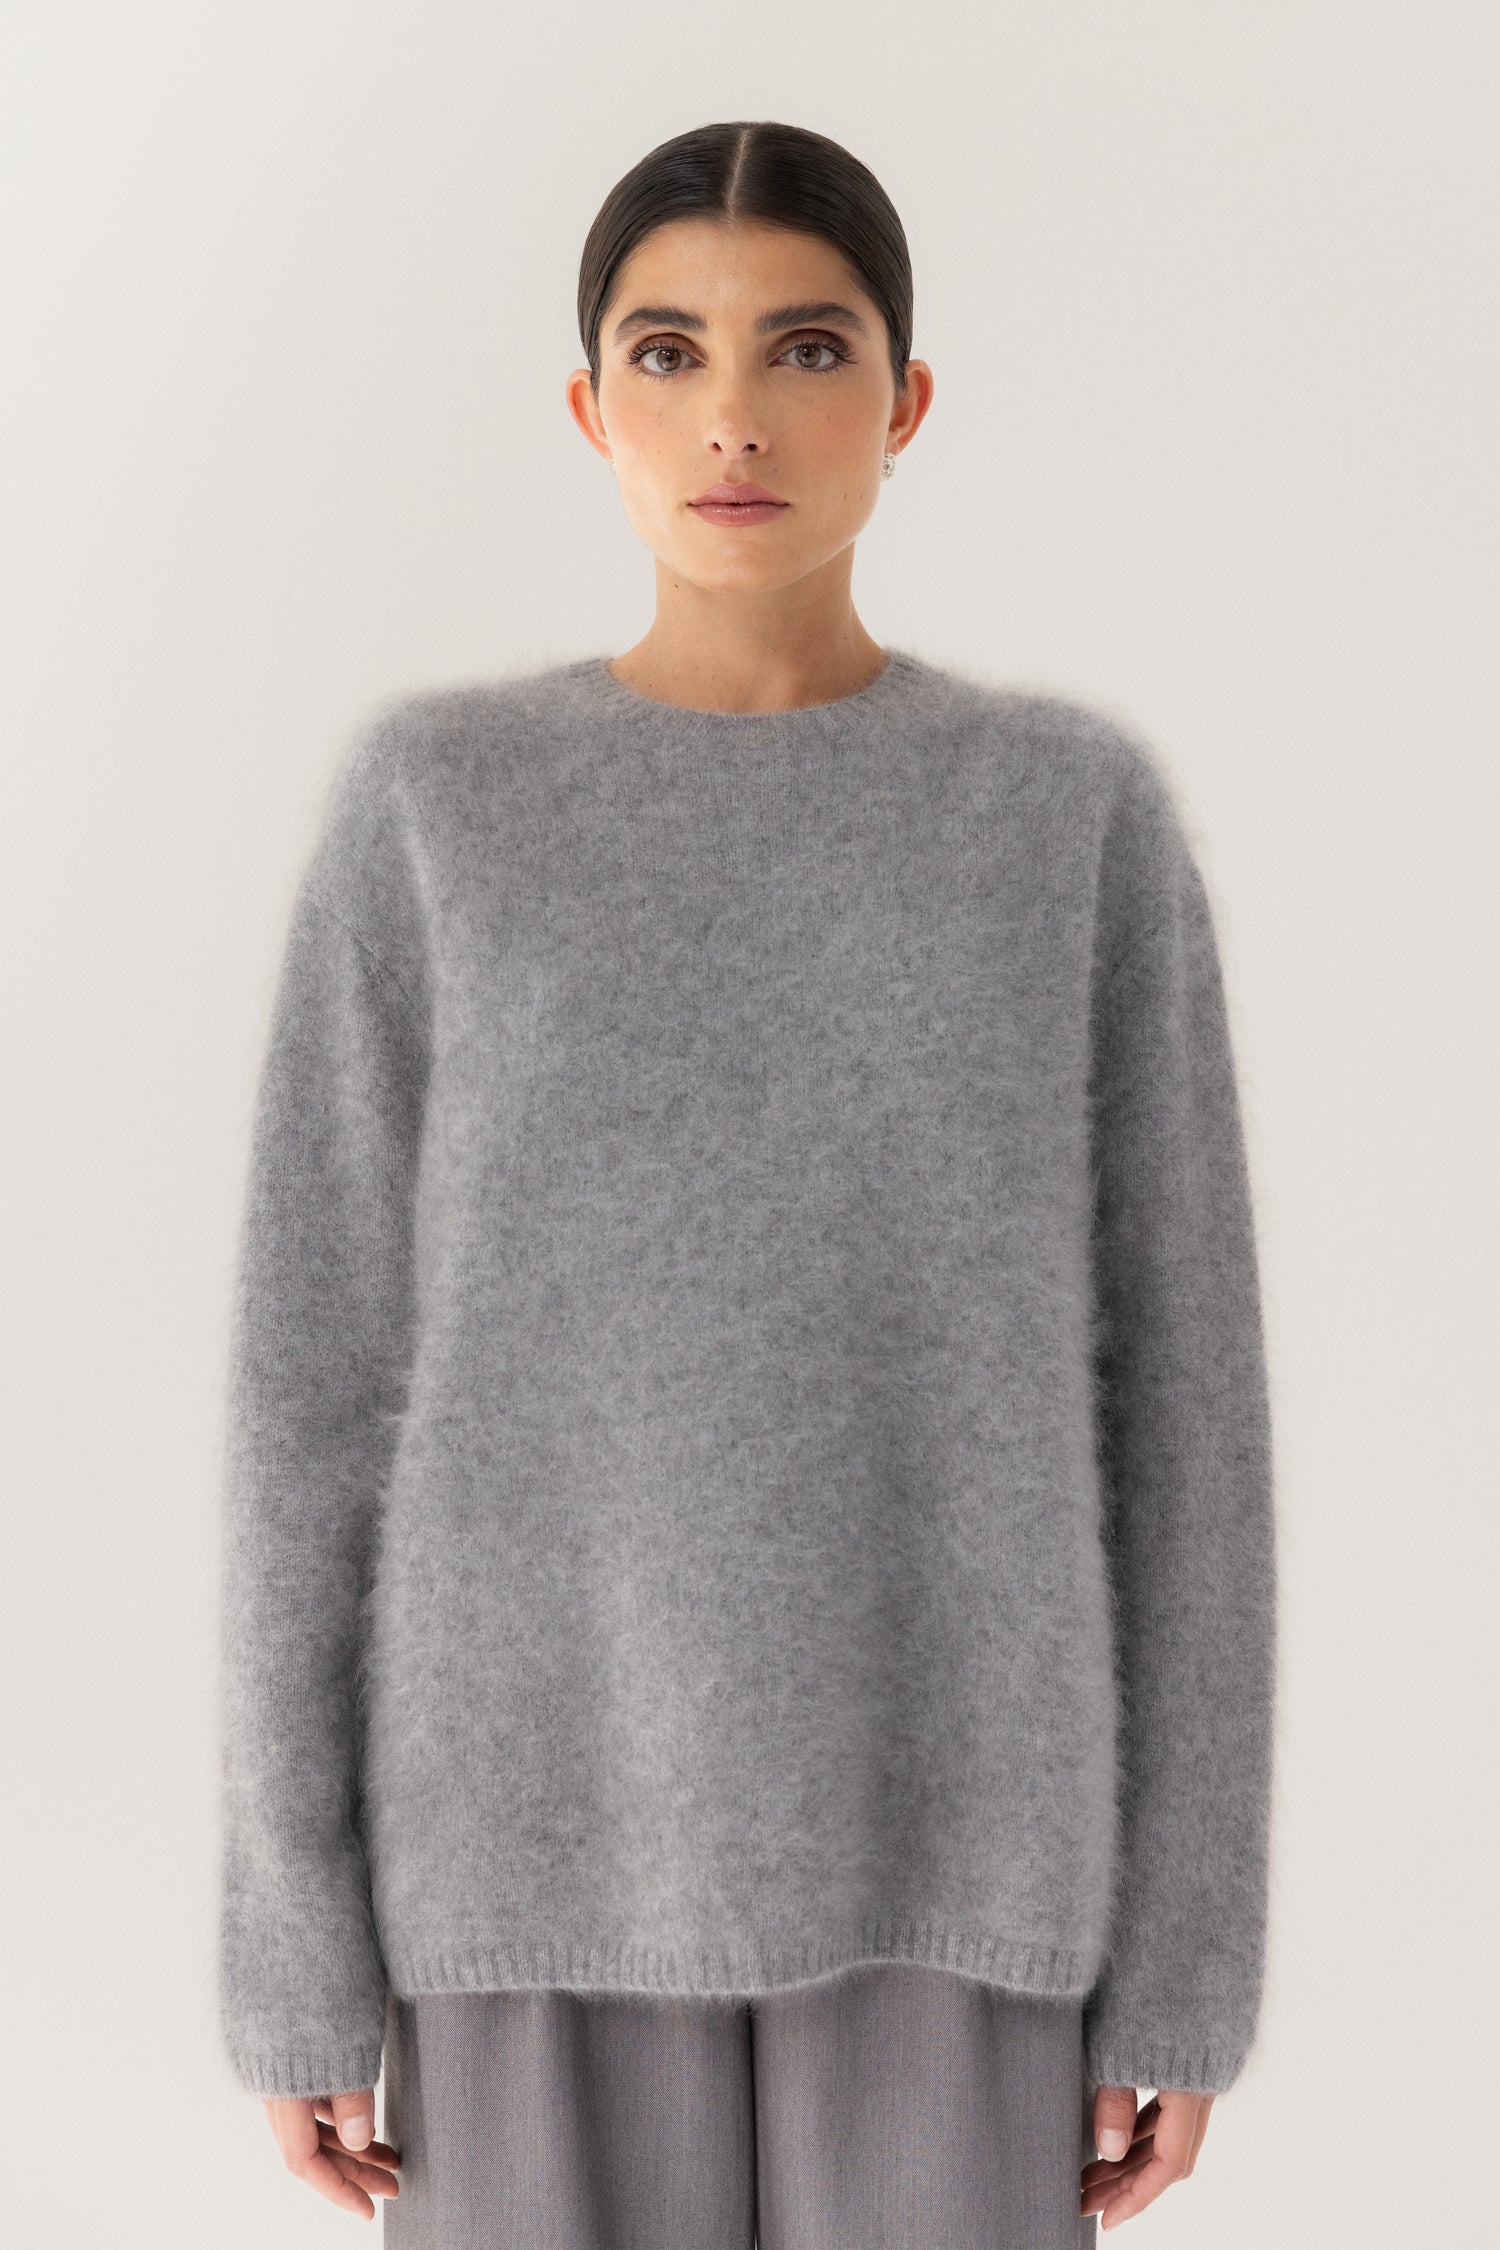 Floy Cashmere Sweater, grey